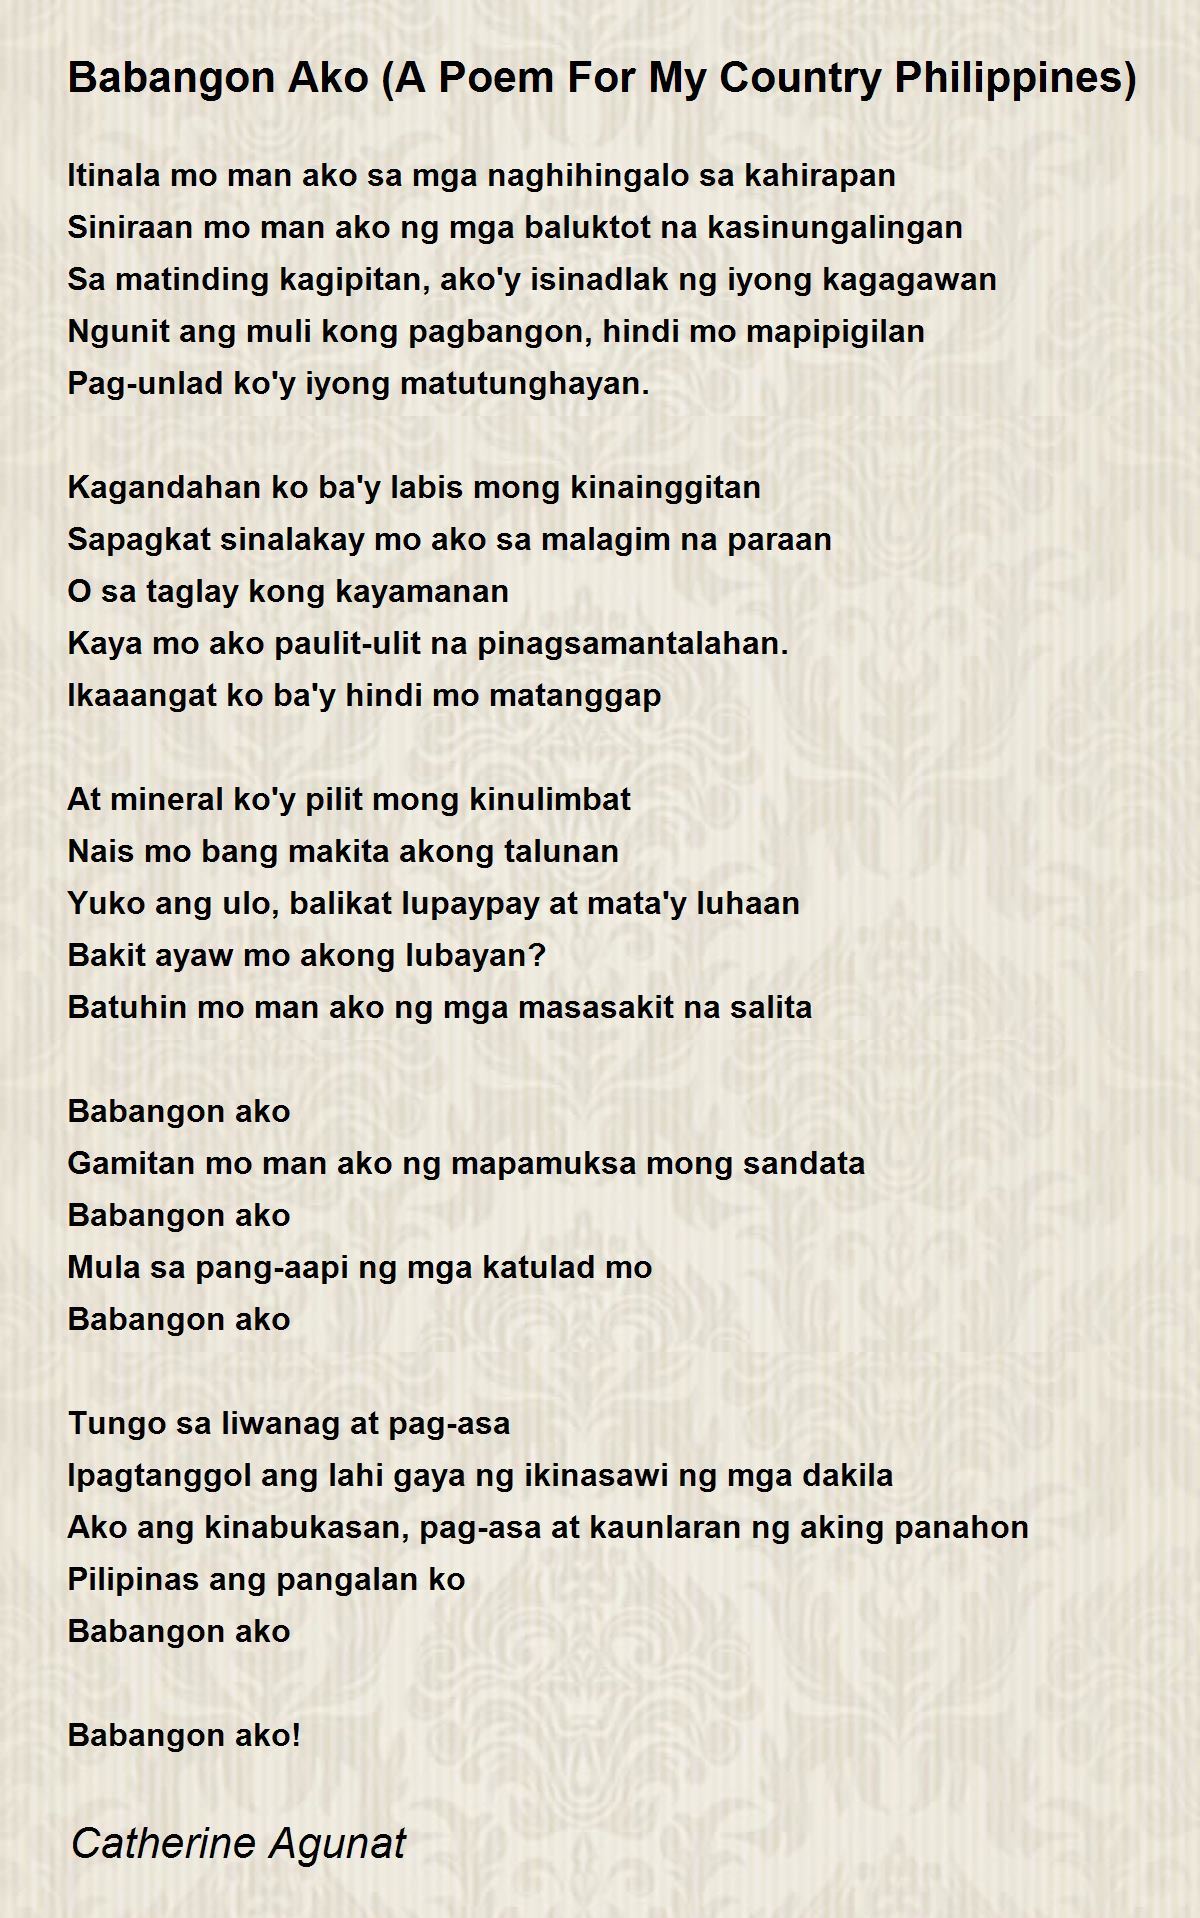 short essay about love tagalog